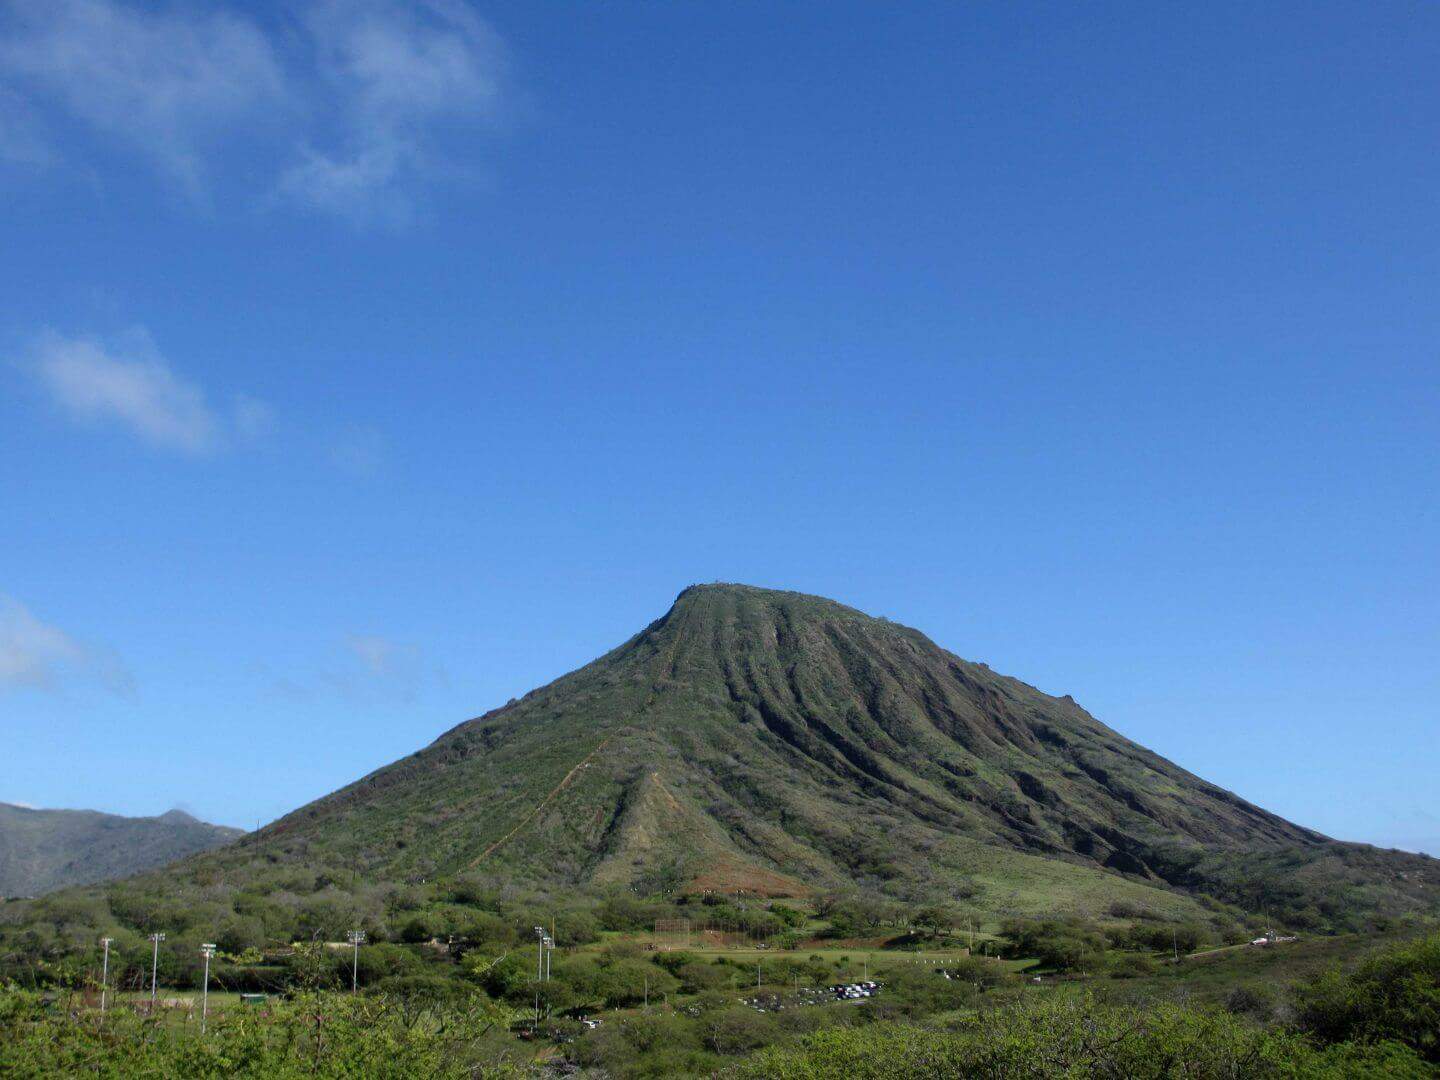 Koko Head Mountain with stair trail up side visible